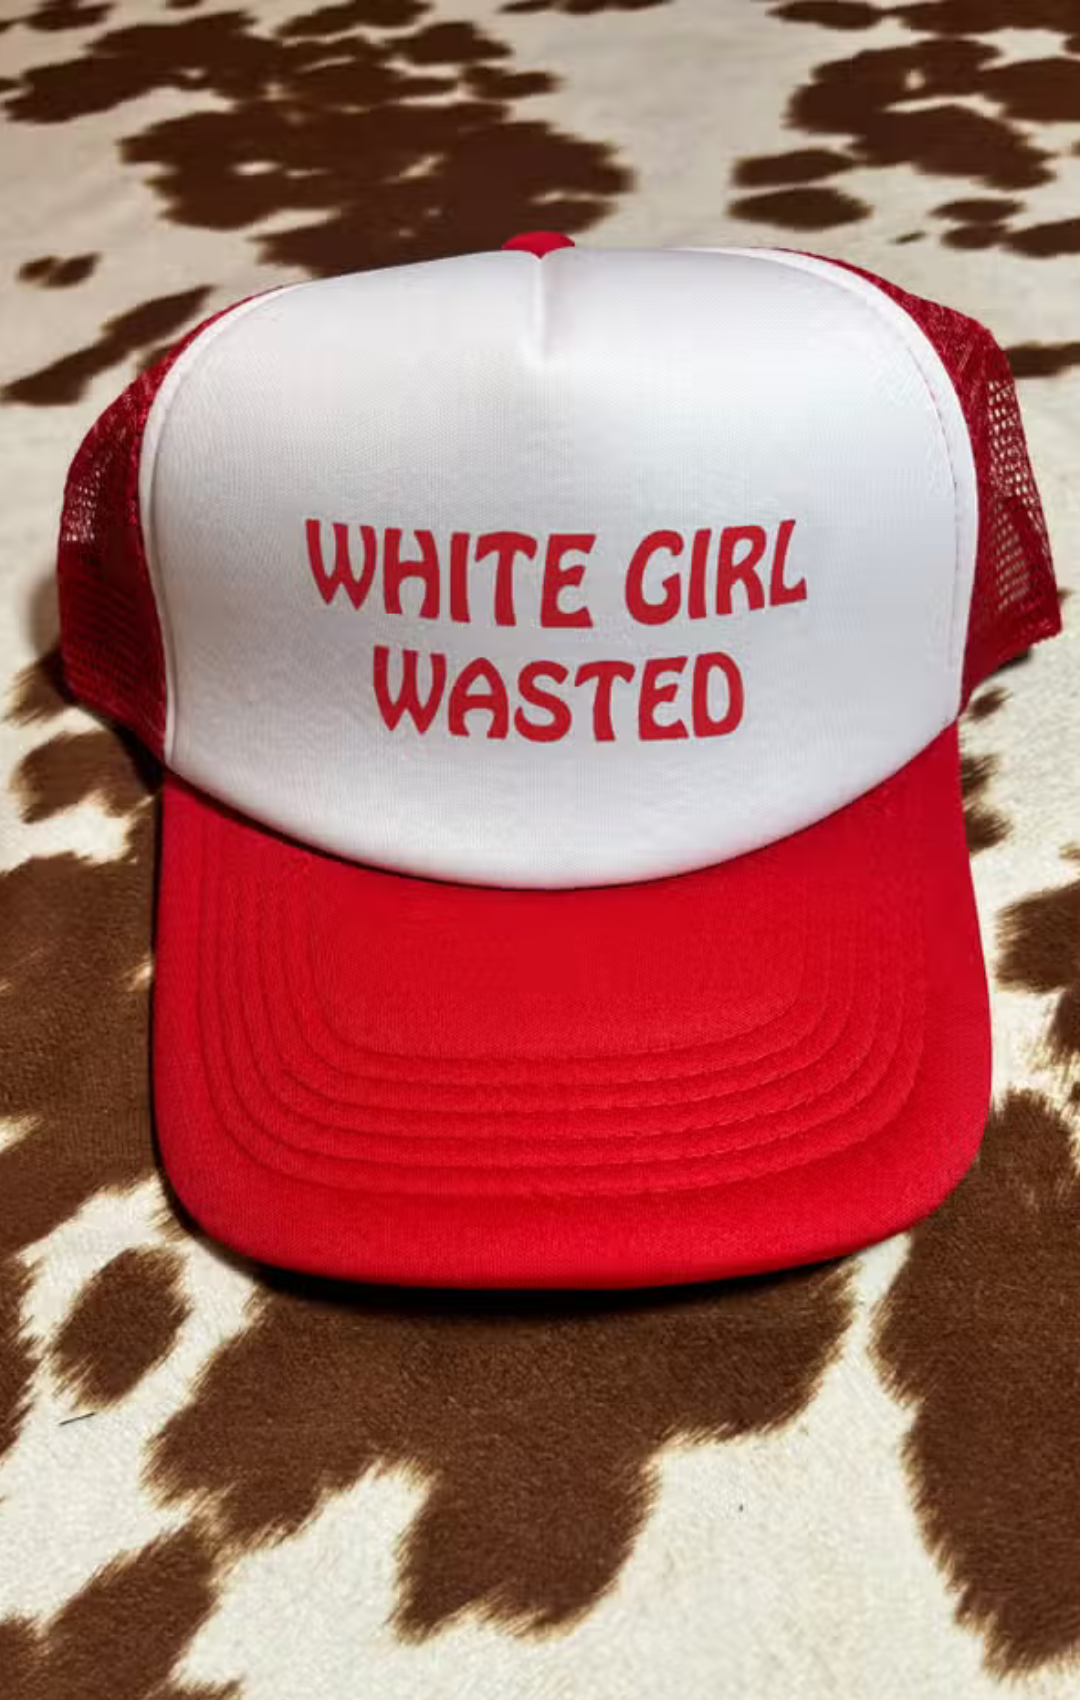 White Girl Wasted Trucker Hat